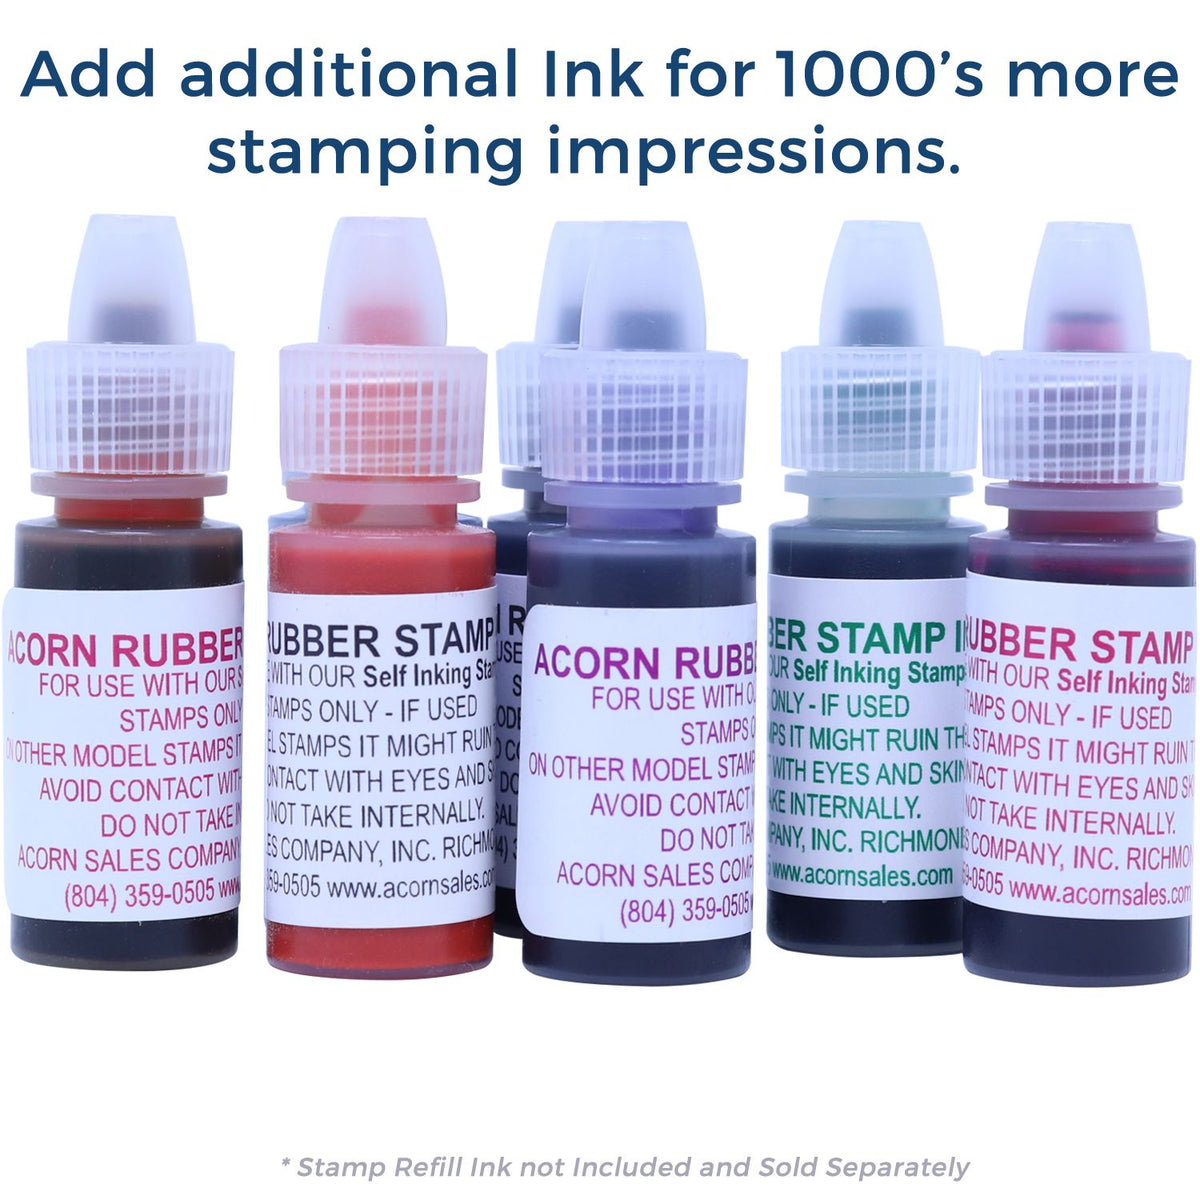 Refill Ink for Self-Inking Round Double Star Stamp Available